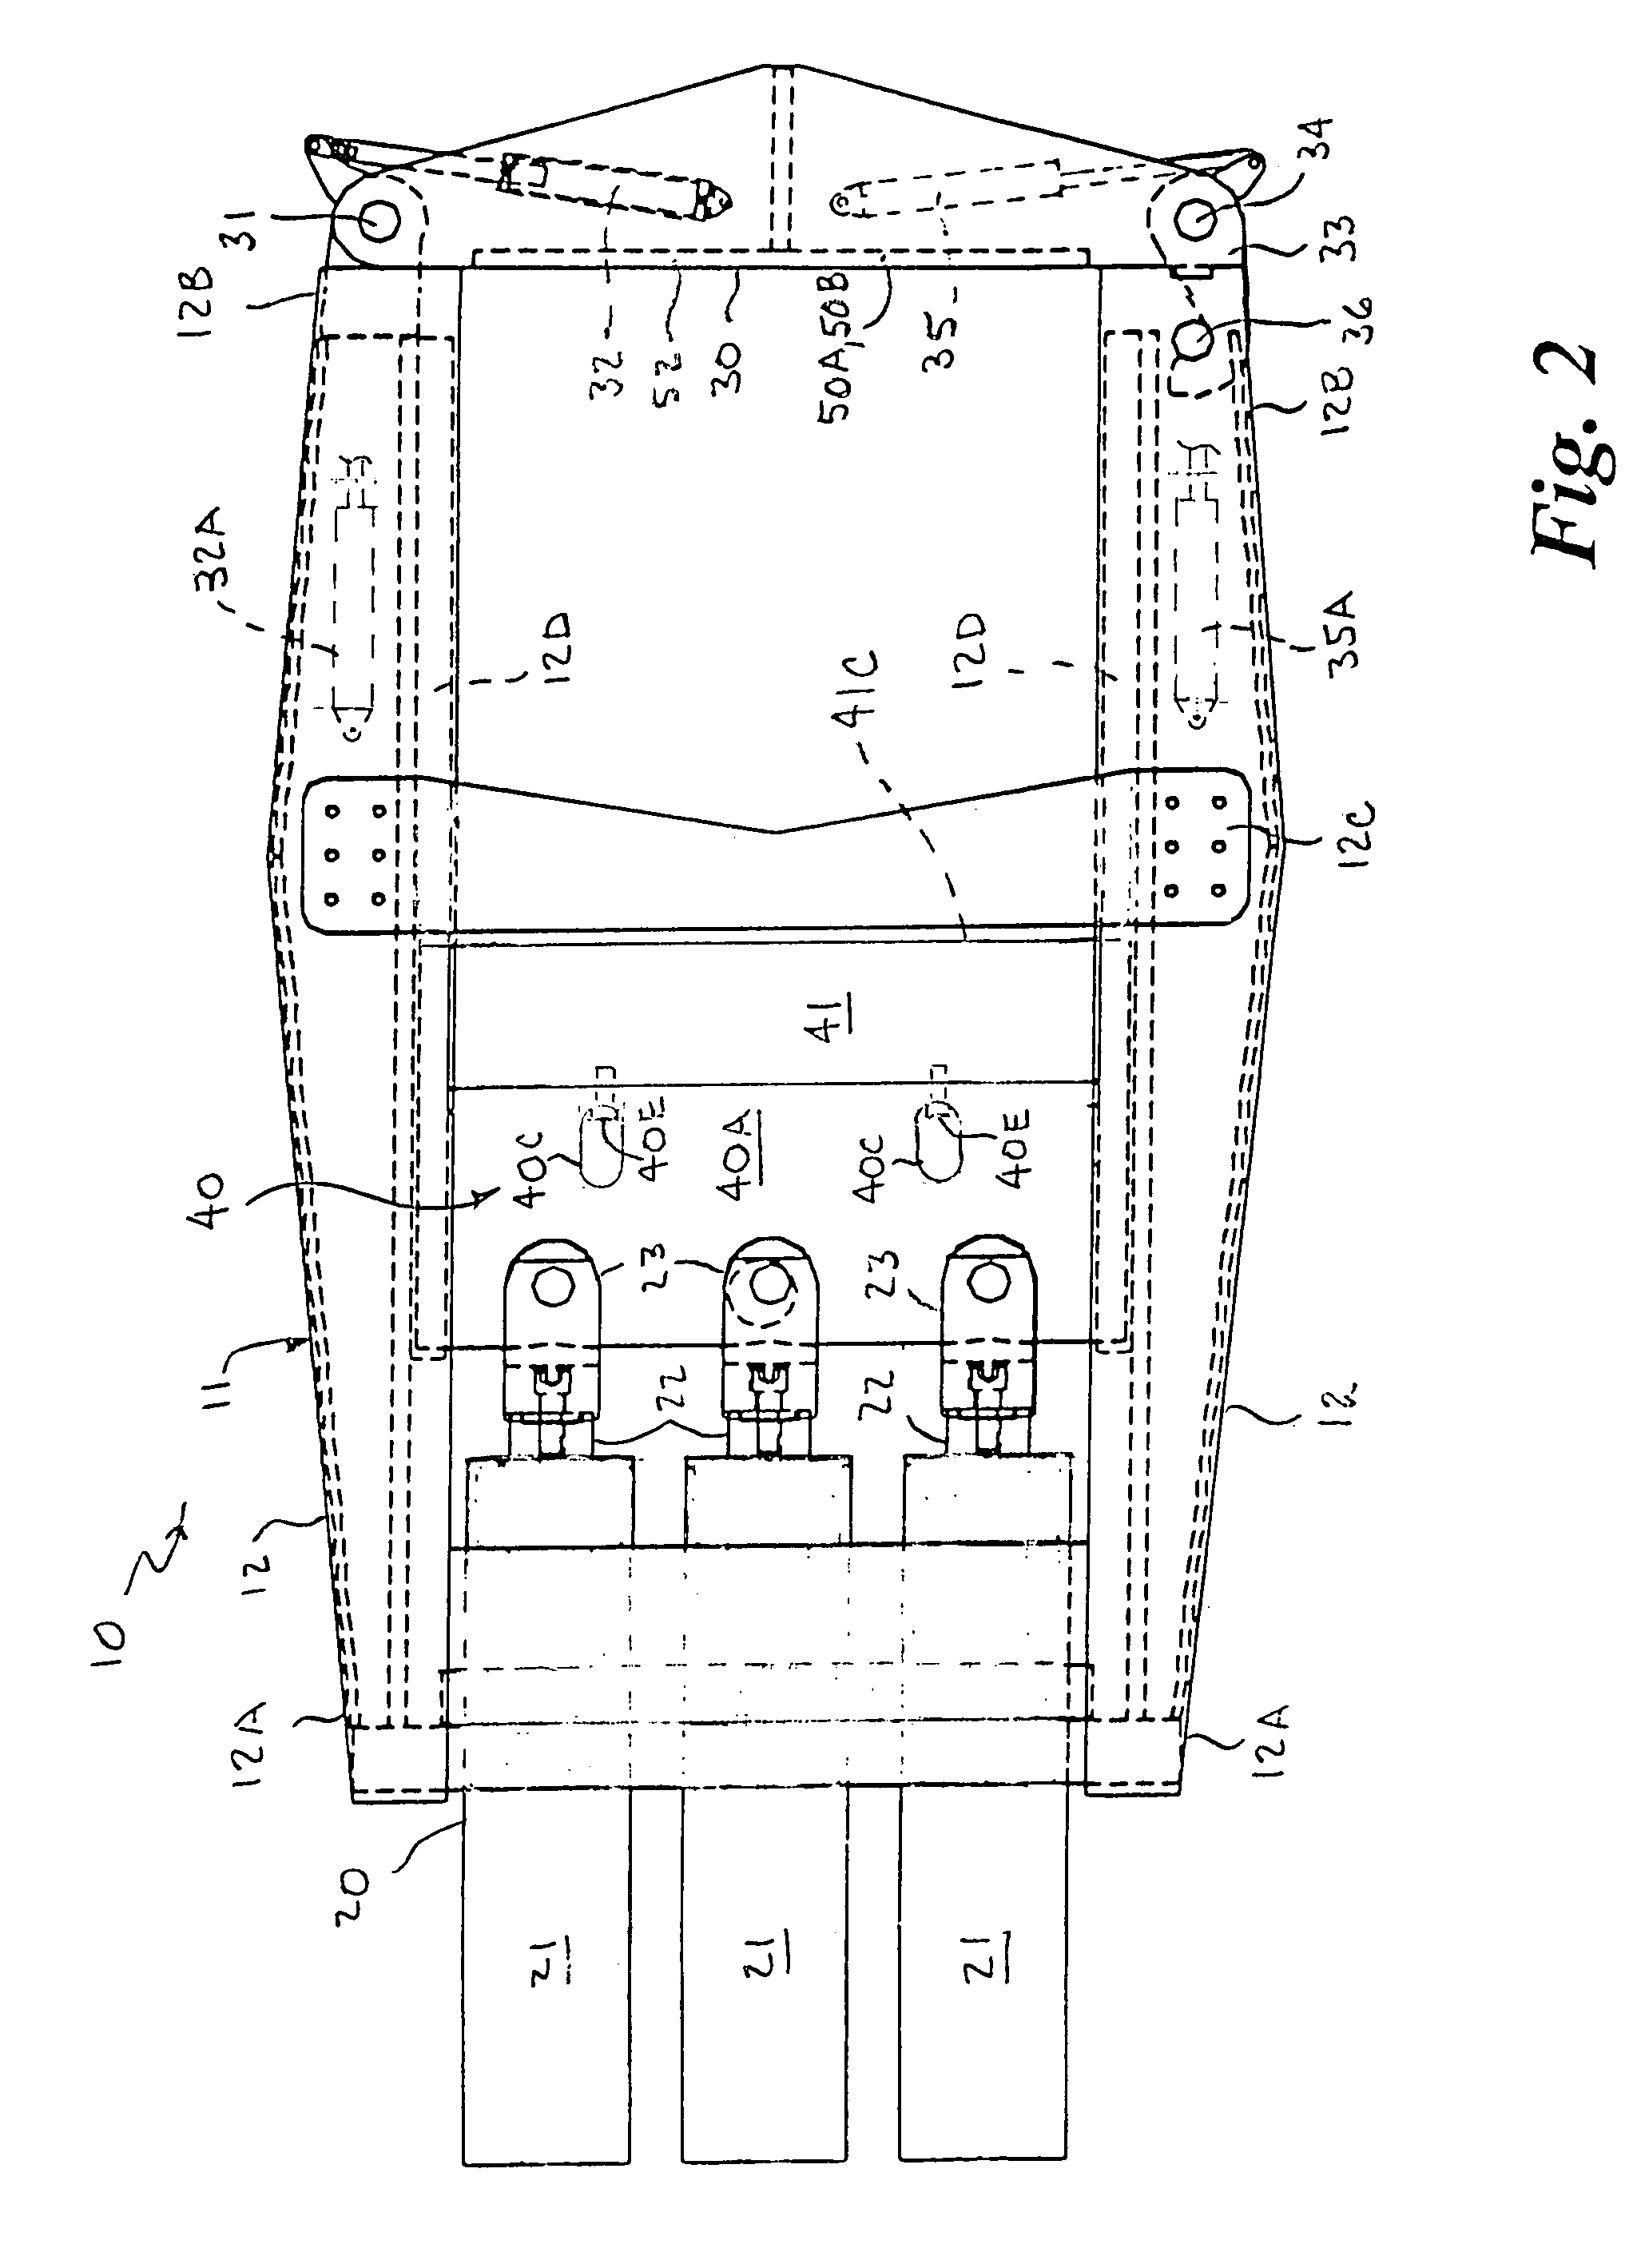 Apparatus and method for shearing reinforced concrete piles and metal piles and crushing reinforced concrete piles